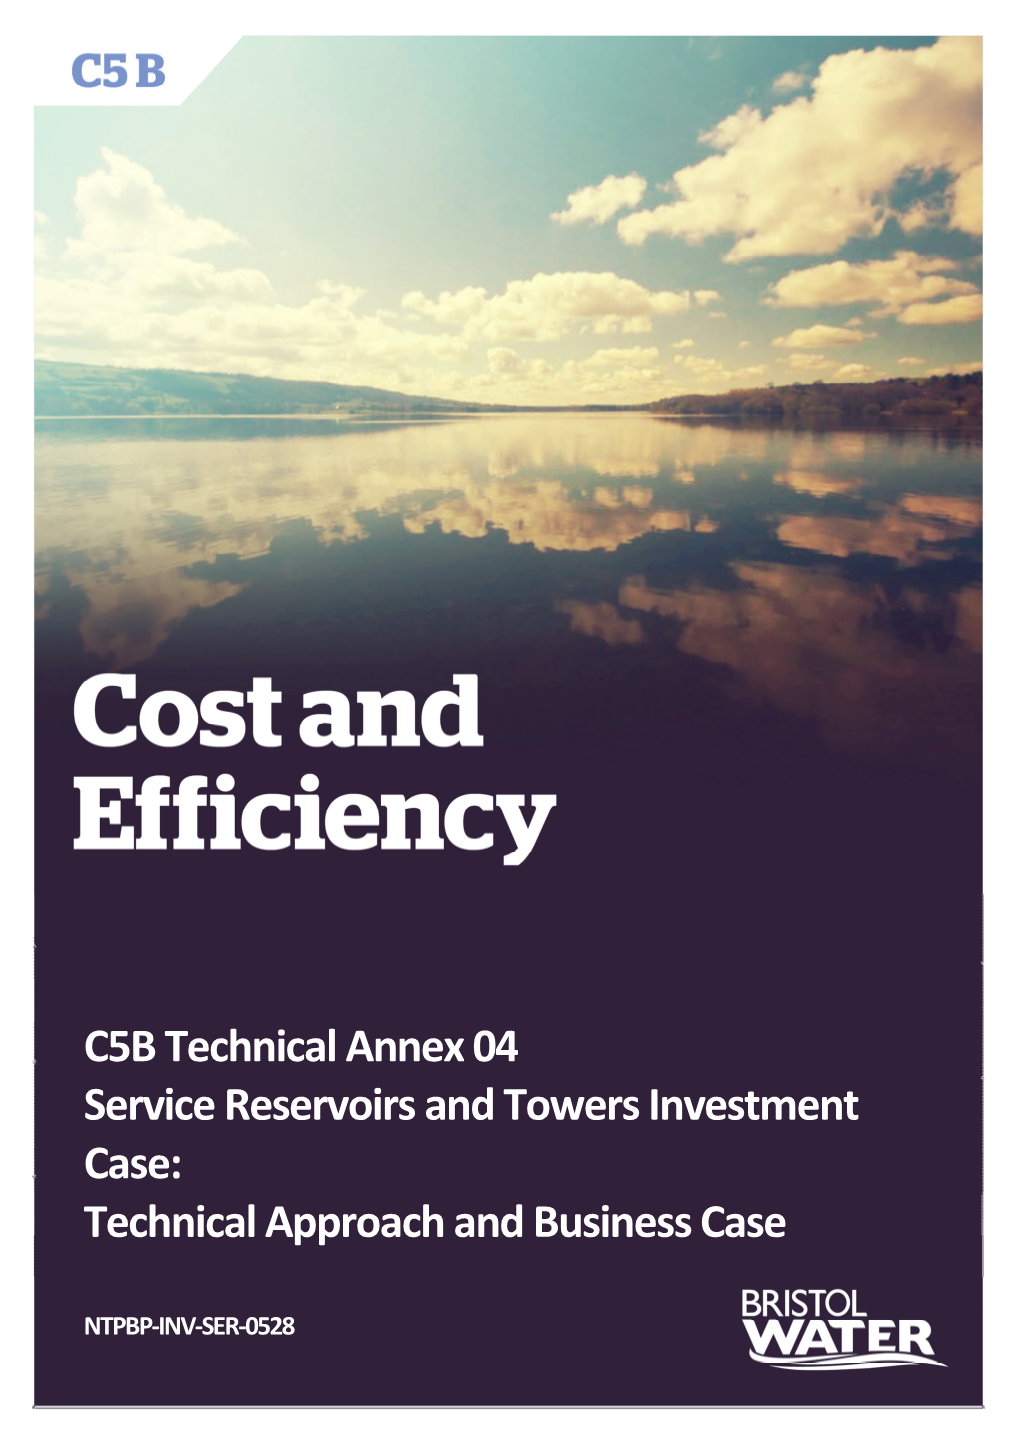 C5B Technical Annex 04 Service Reservoirs and Towers Investment Case: Technical Approach and Business Case